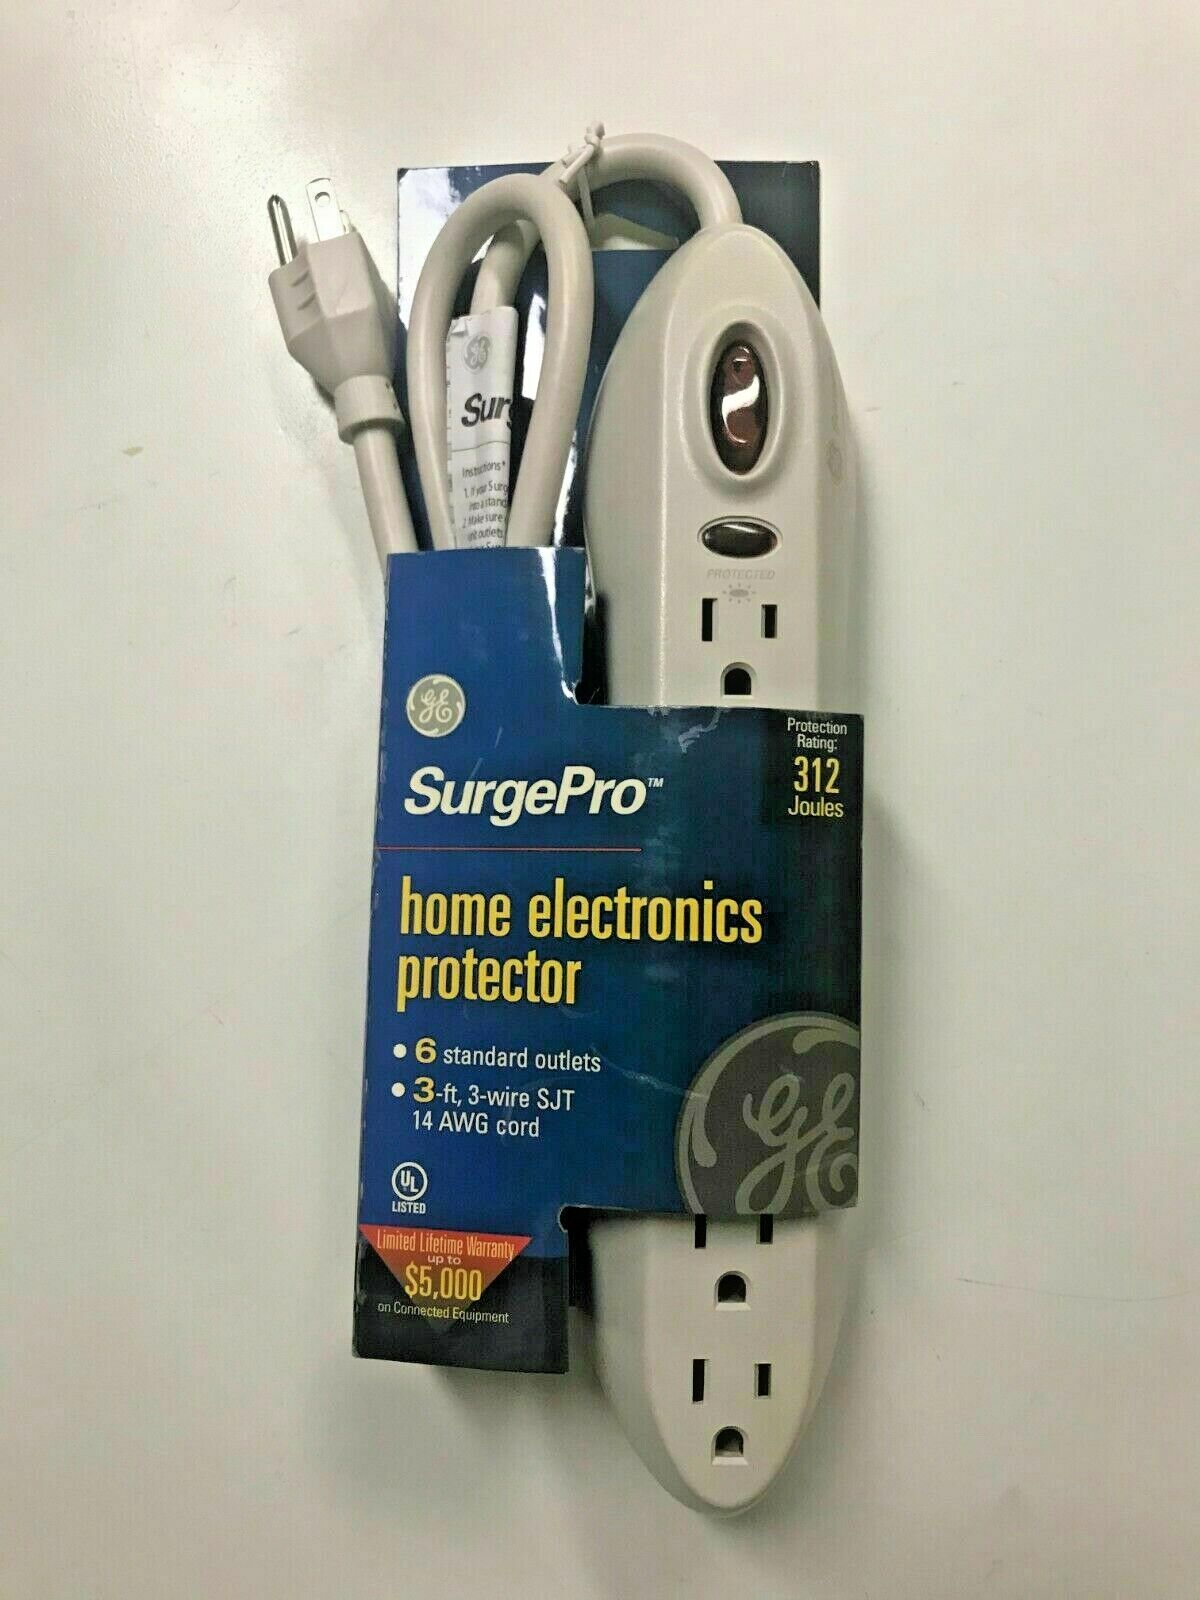 NEW GE SurgePro 6-Outlet Electronics Protector 312 Joules, 3-ft. 14 AWG 3-wire